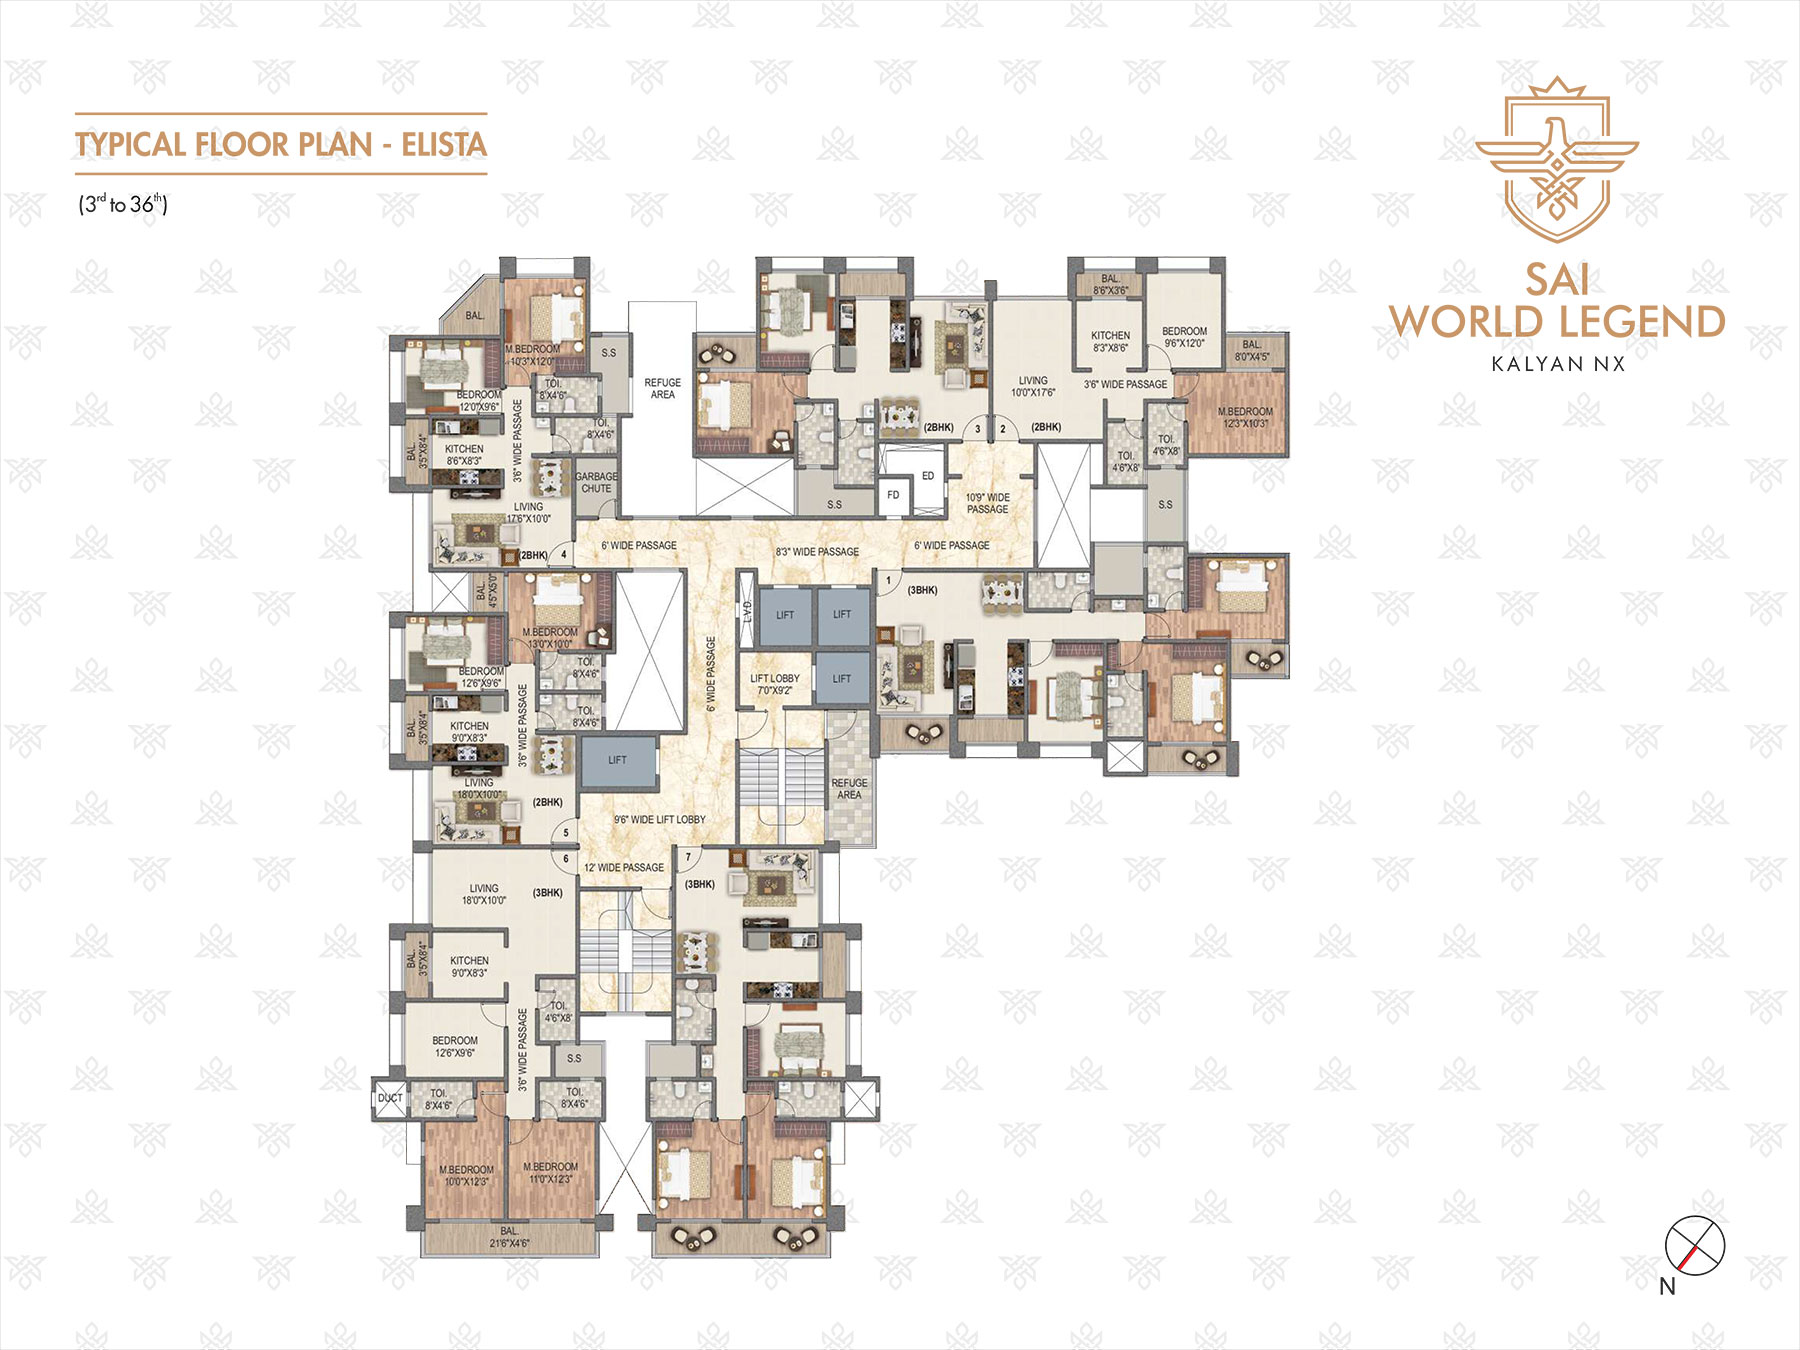 TYPICAL FLOOR PLAN ELISTA 3rd to 36th